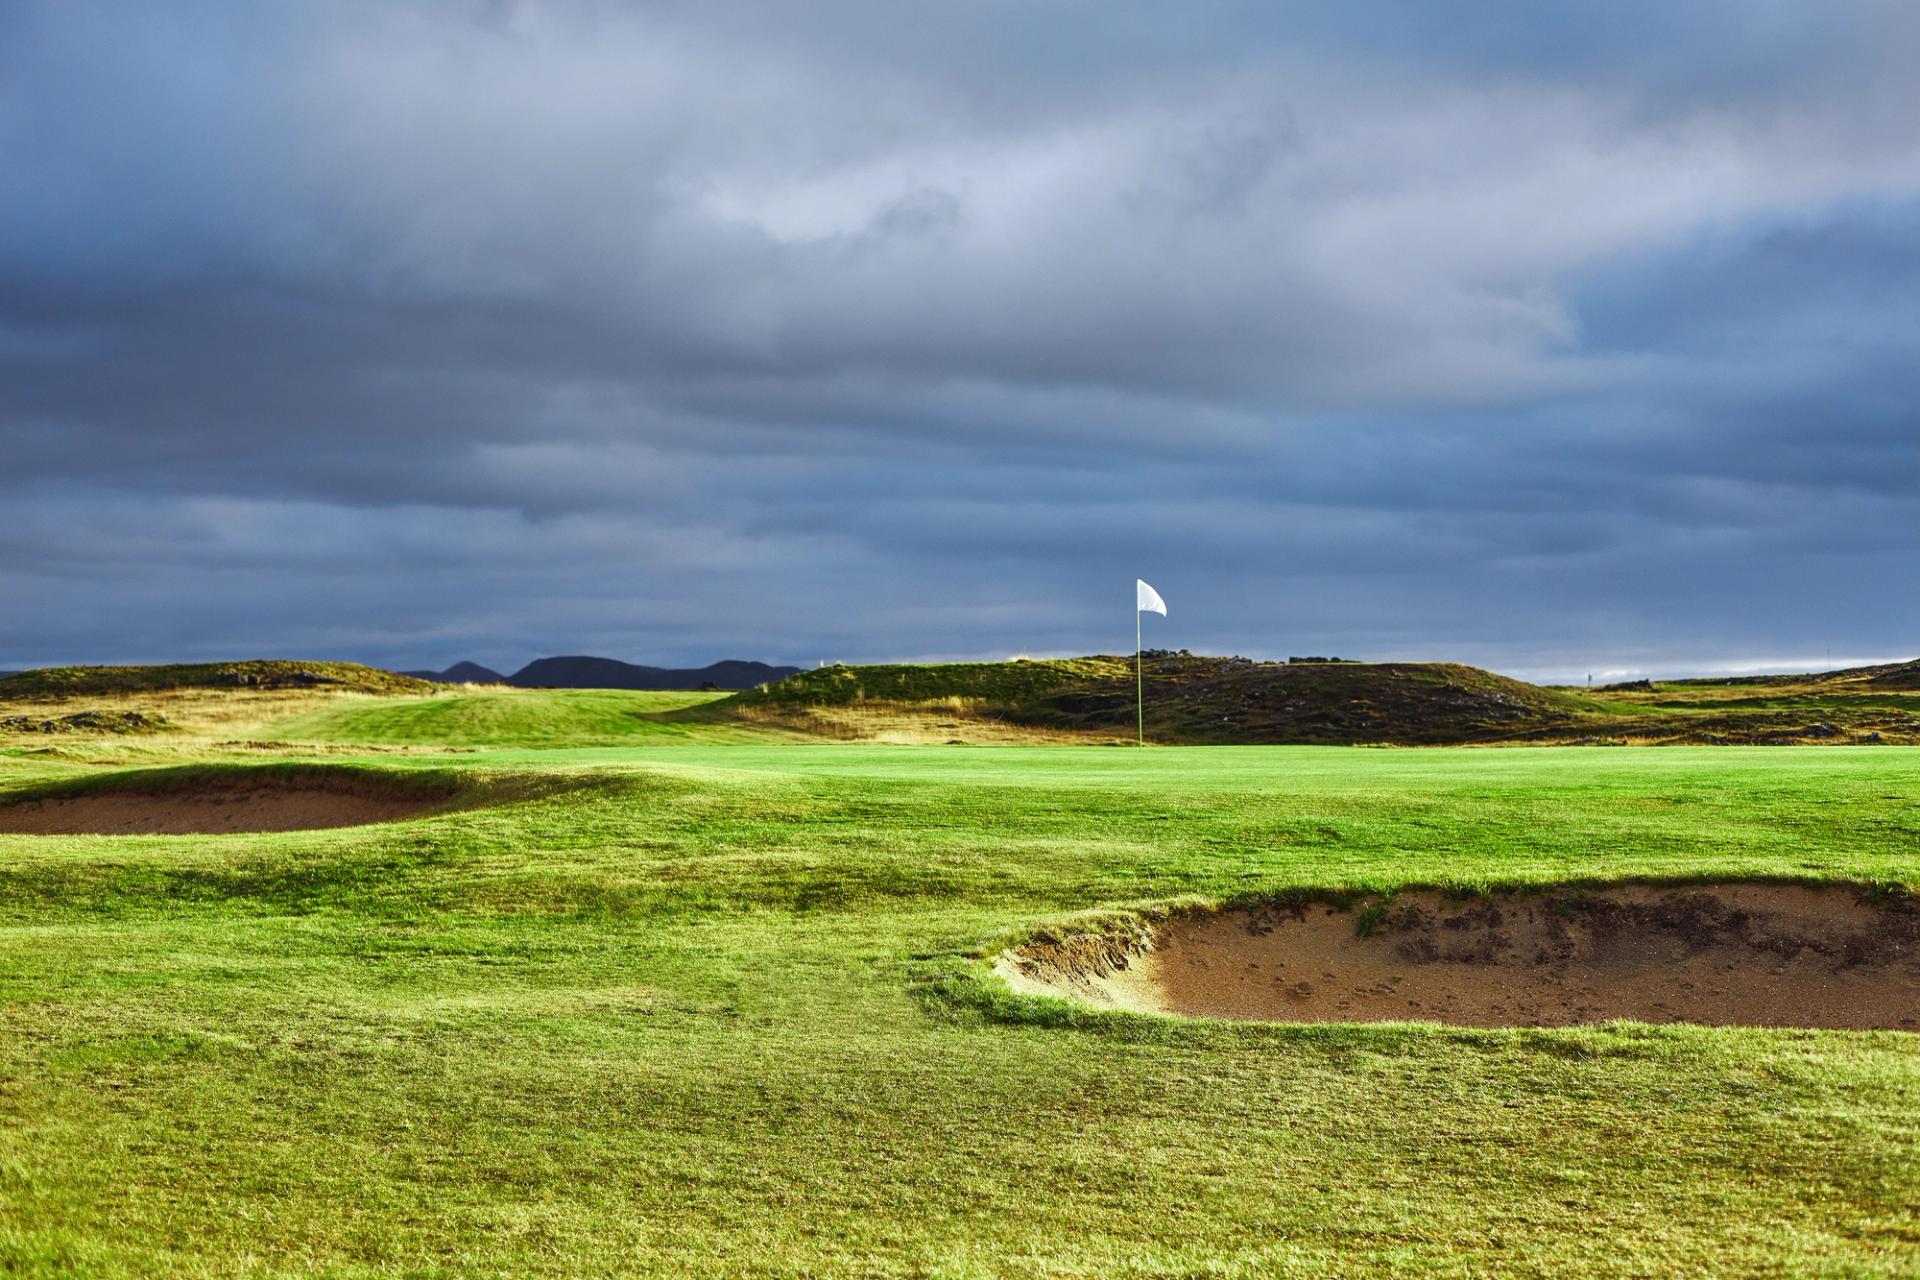 Golfing in Iceland